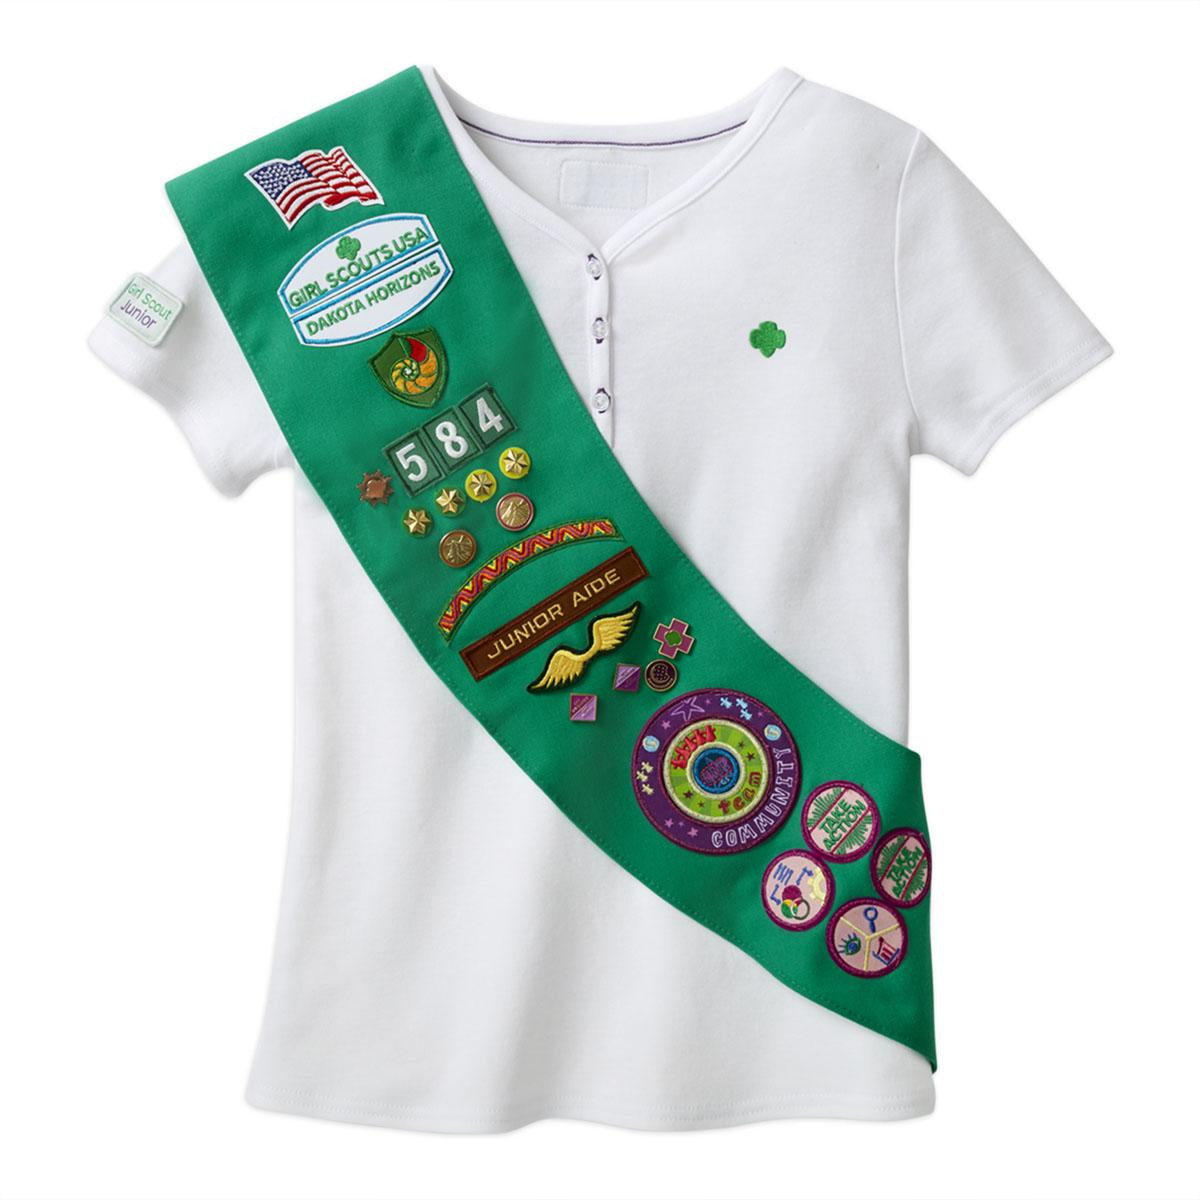 Girls Scouts Junior Sash(Recycled Material)